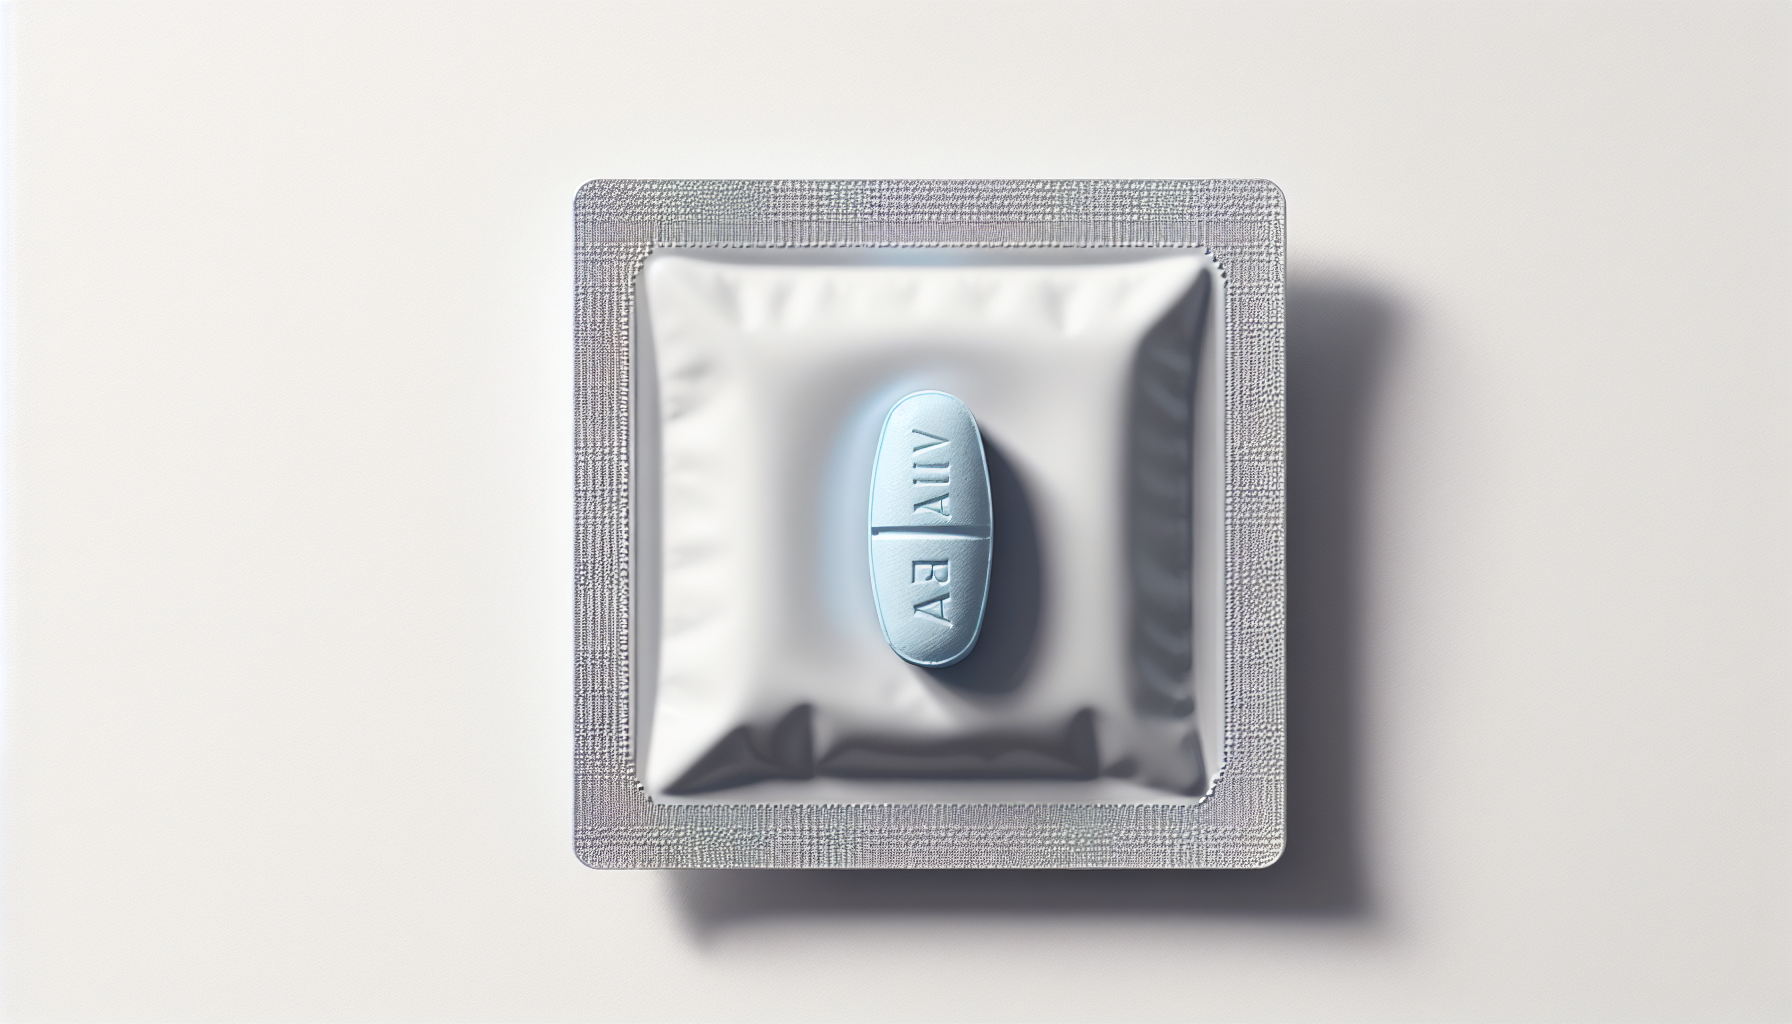 What Happens If You Use Viagra Without Erectile Dysfunction?